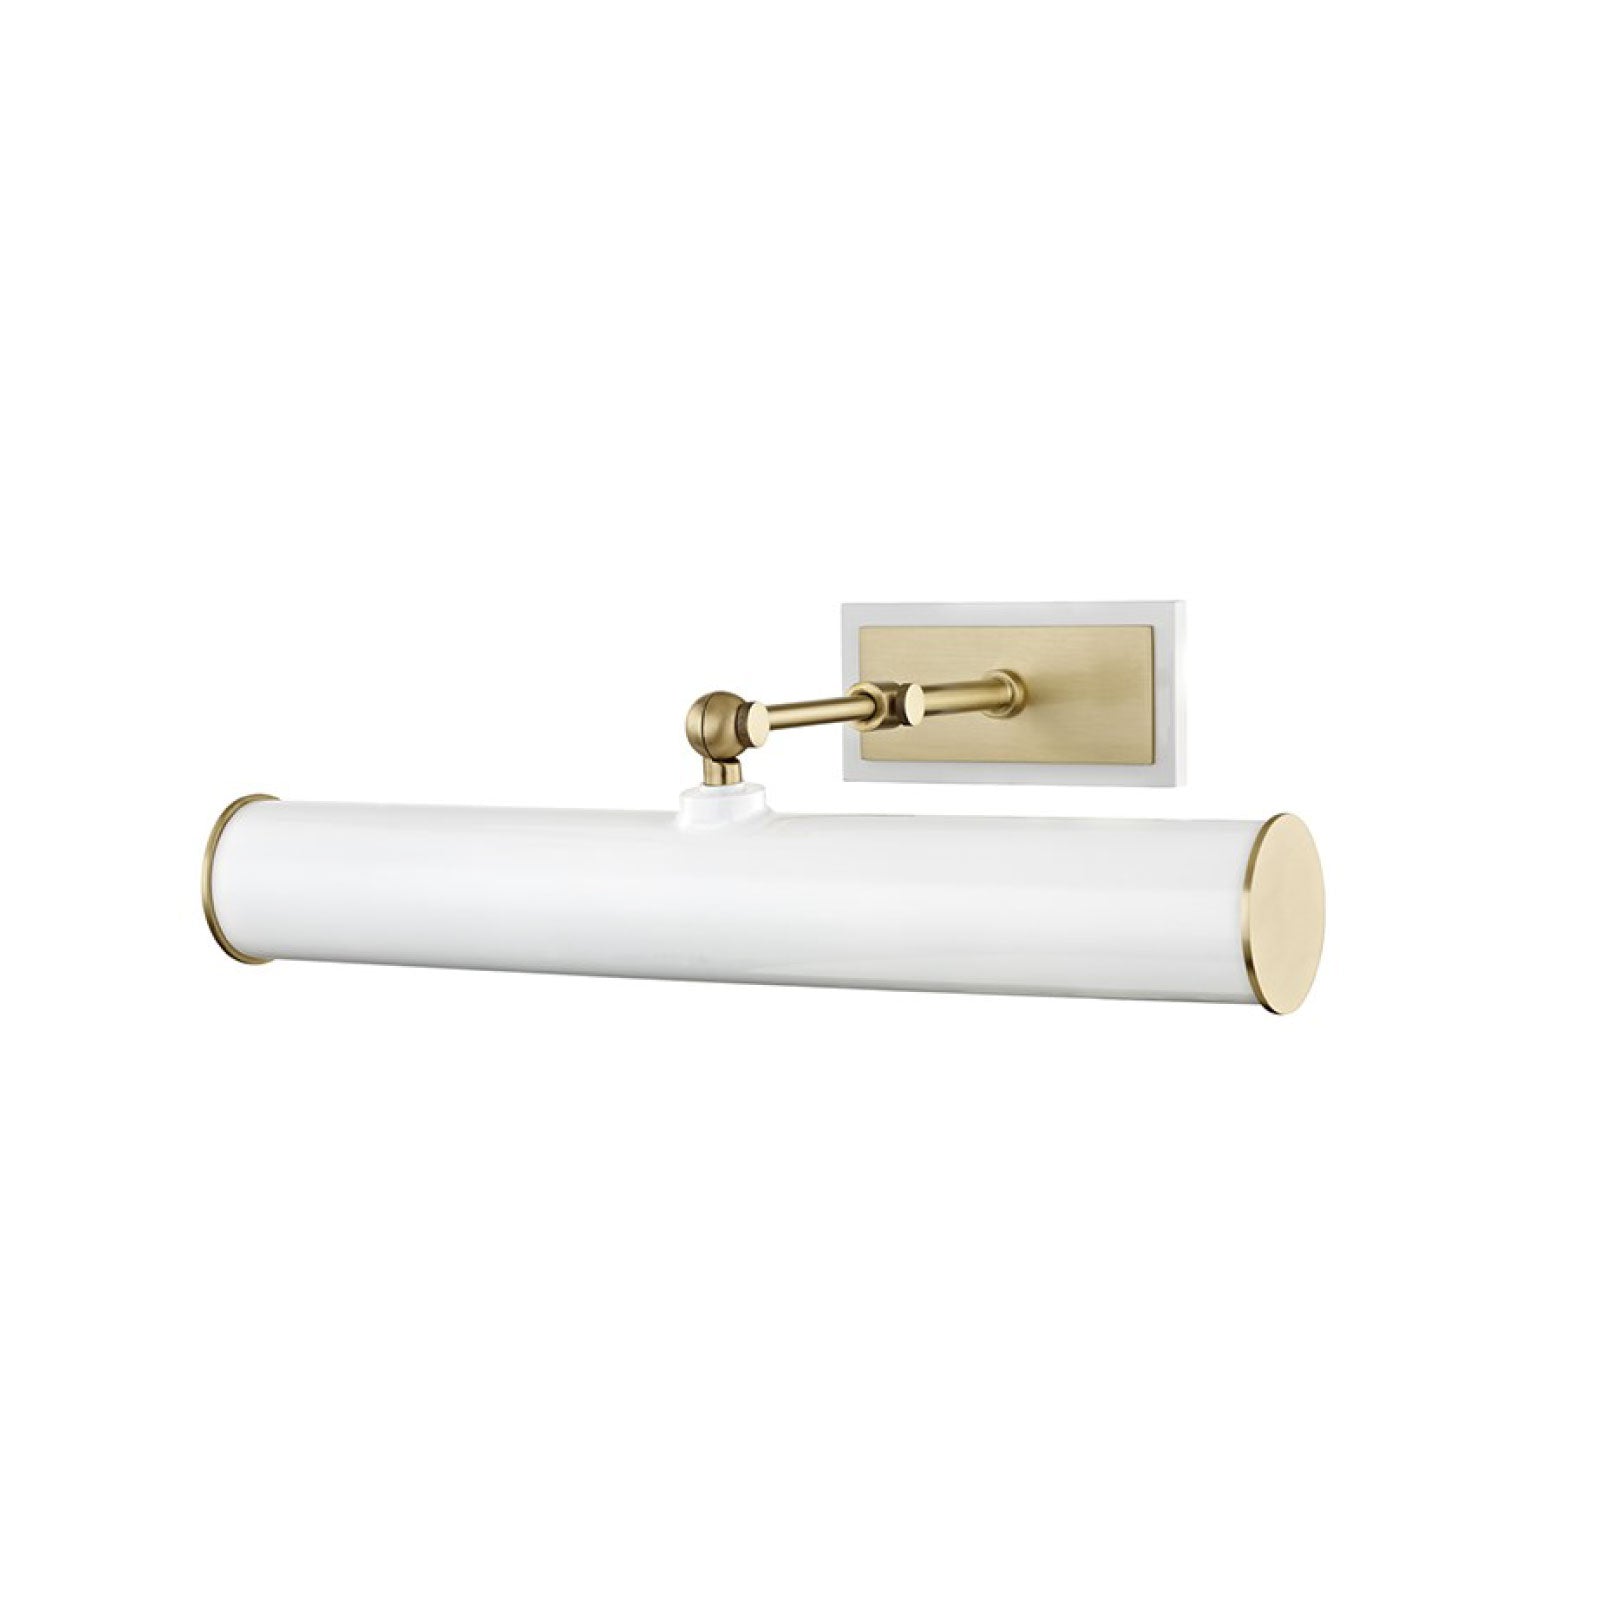 White plug-in picture light with gold accents